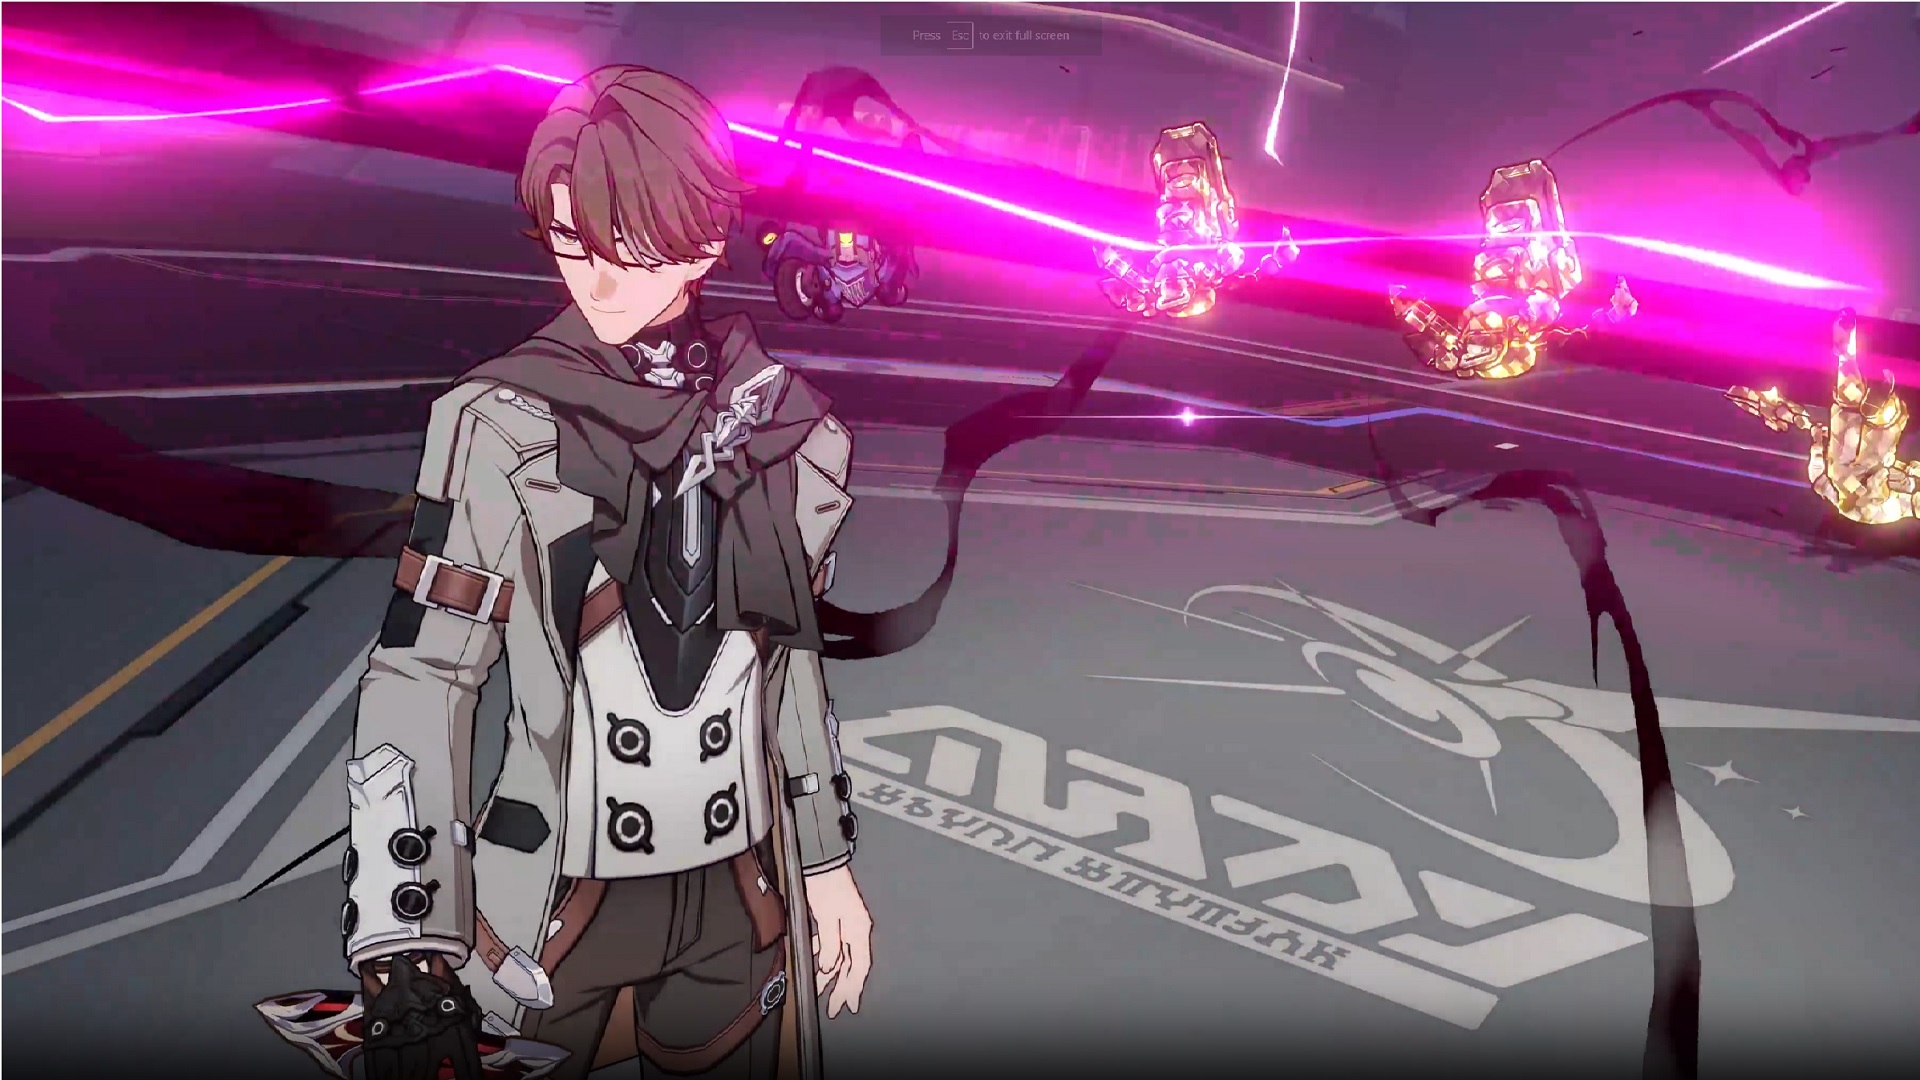 Honkai Star Rail reroll: a male anime character wearing glasses set against a pink, glowing light.